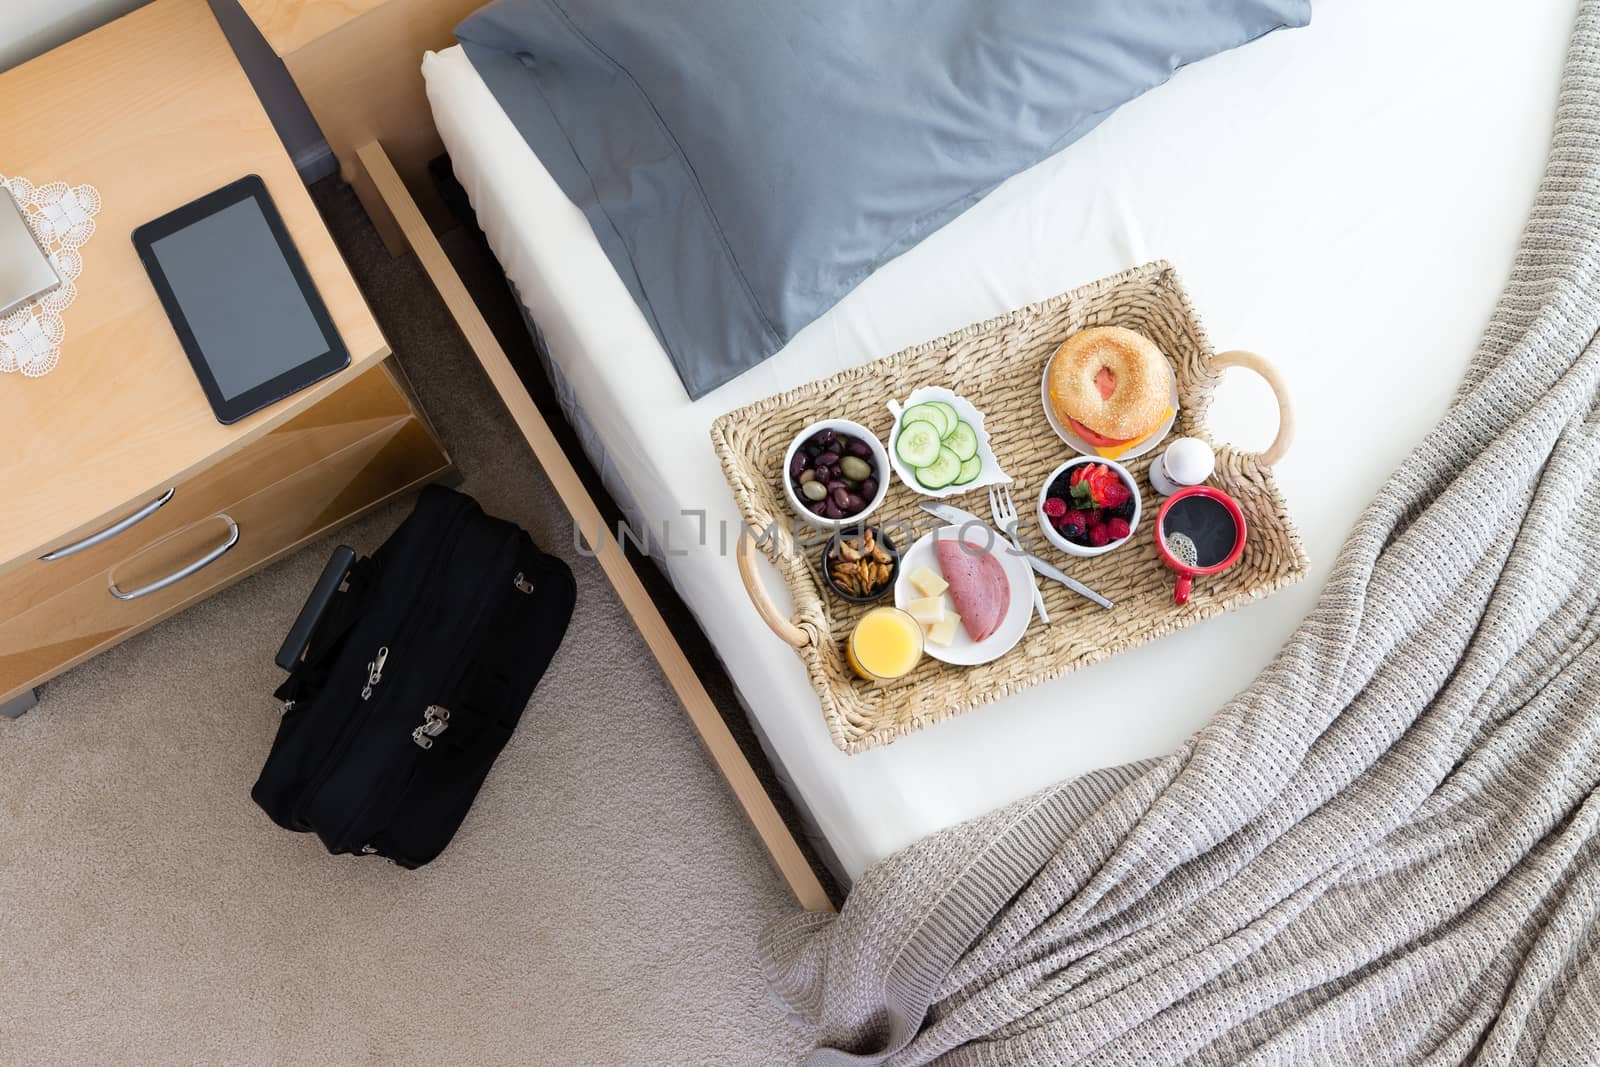 High Angle View of Breakfast Tray on Unmade Bed in Hotel Room in Business Trip Concept Image with Black Briefcase Bag and Computer Tablet on Bedside Table